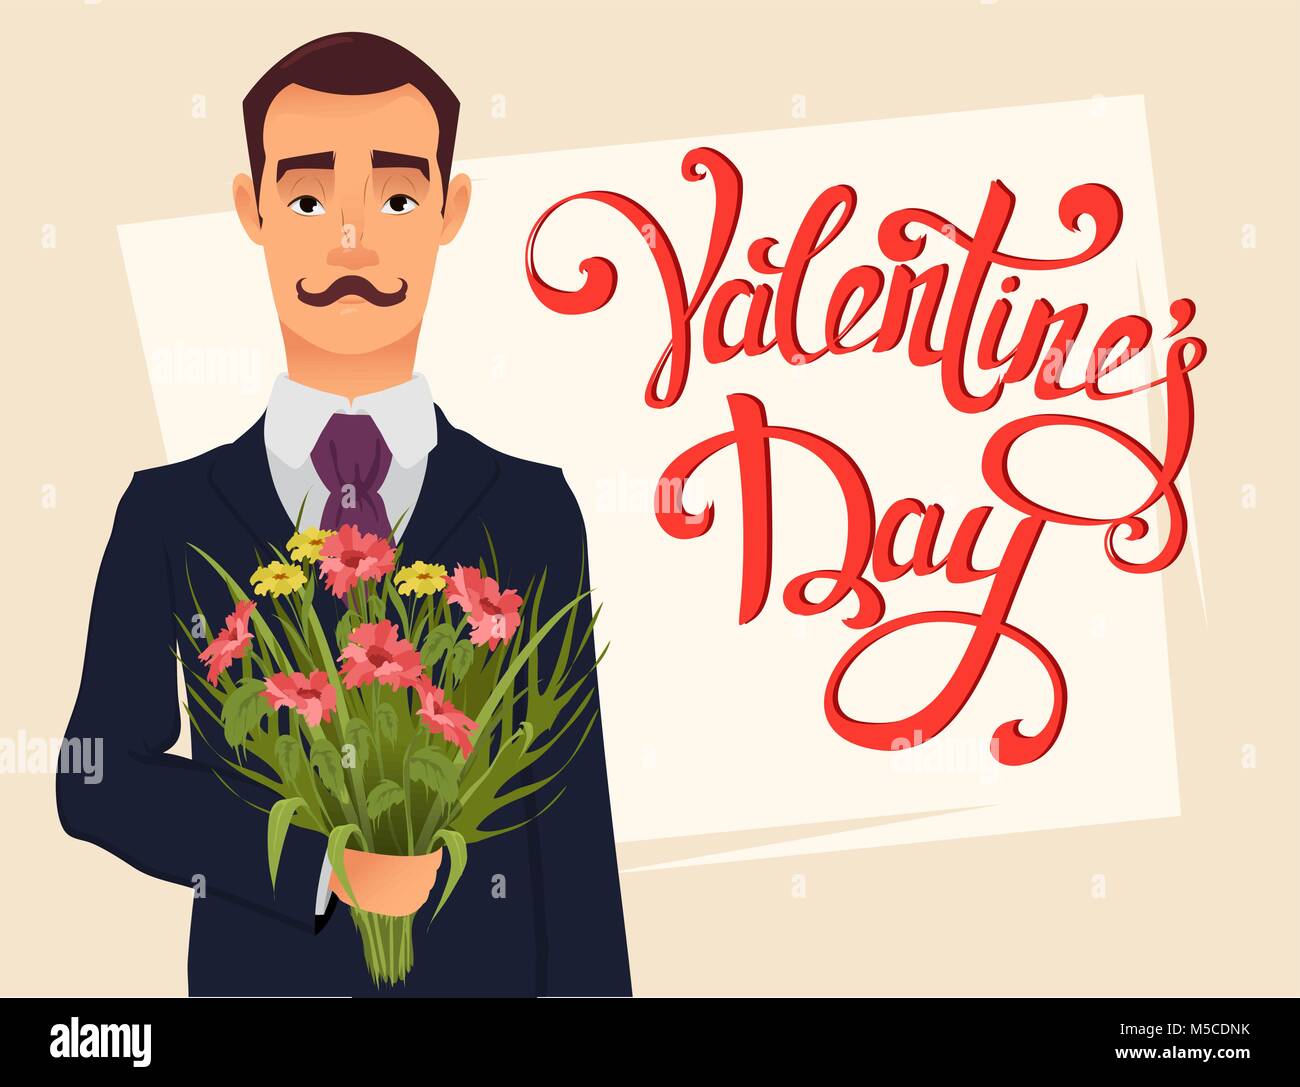 Valentine day greeting card with hand drawn lettering. Handsome gentleman in suit with mustache holding bouquet of wildflowers Stock Vector